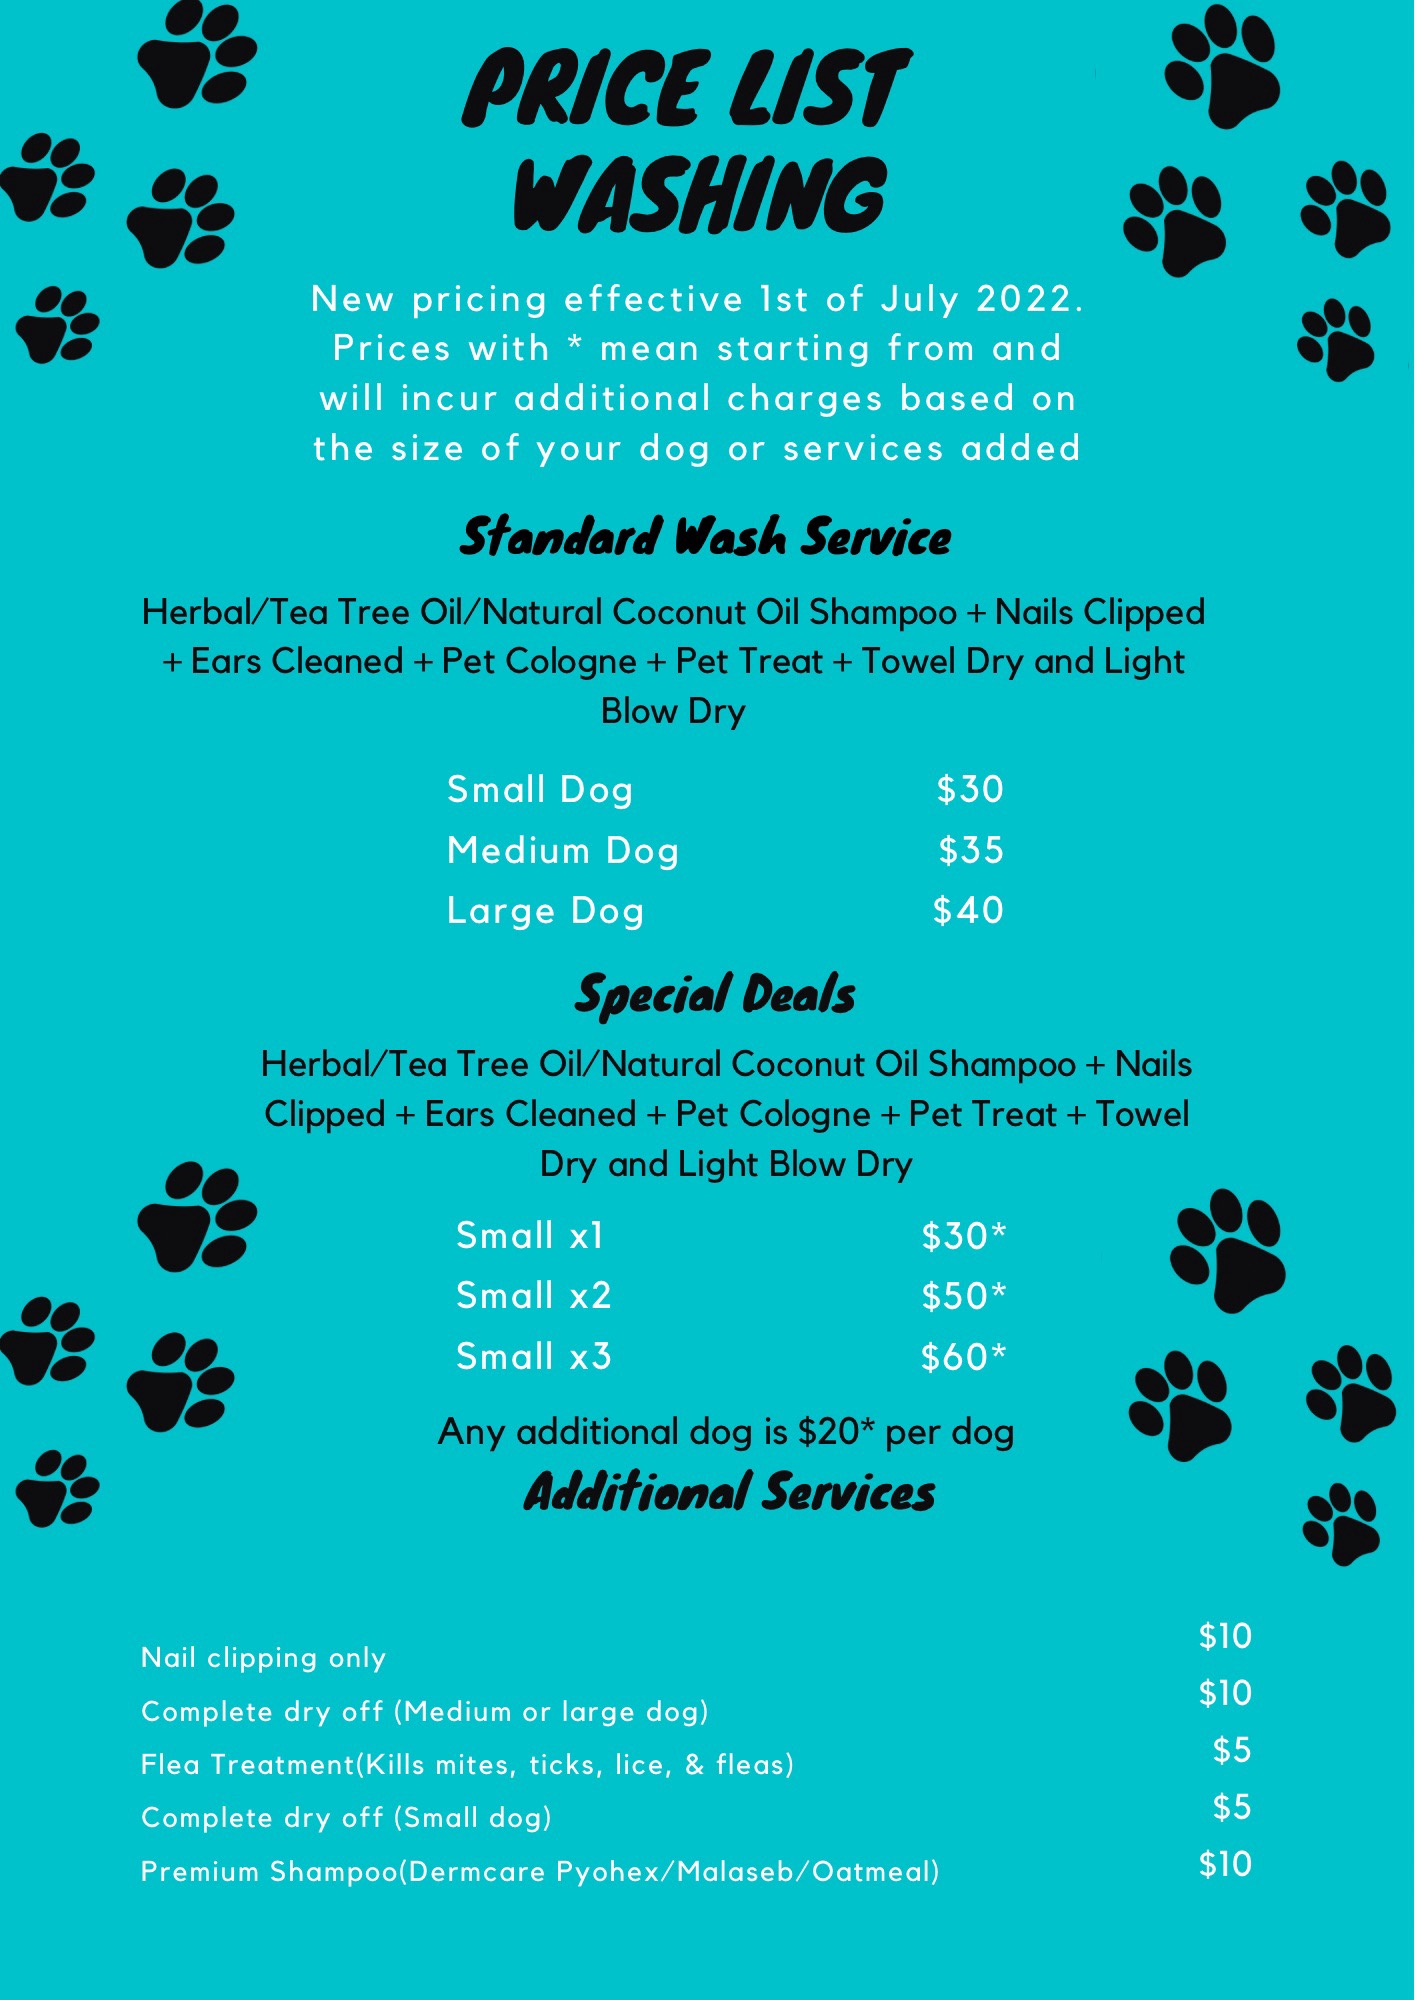 List of Prices for Washing of Dogs of all sizes.